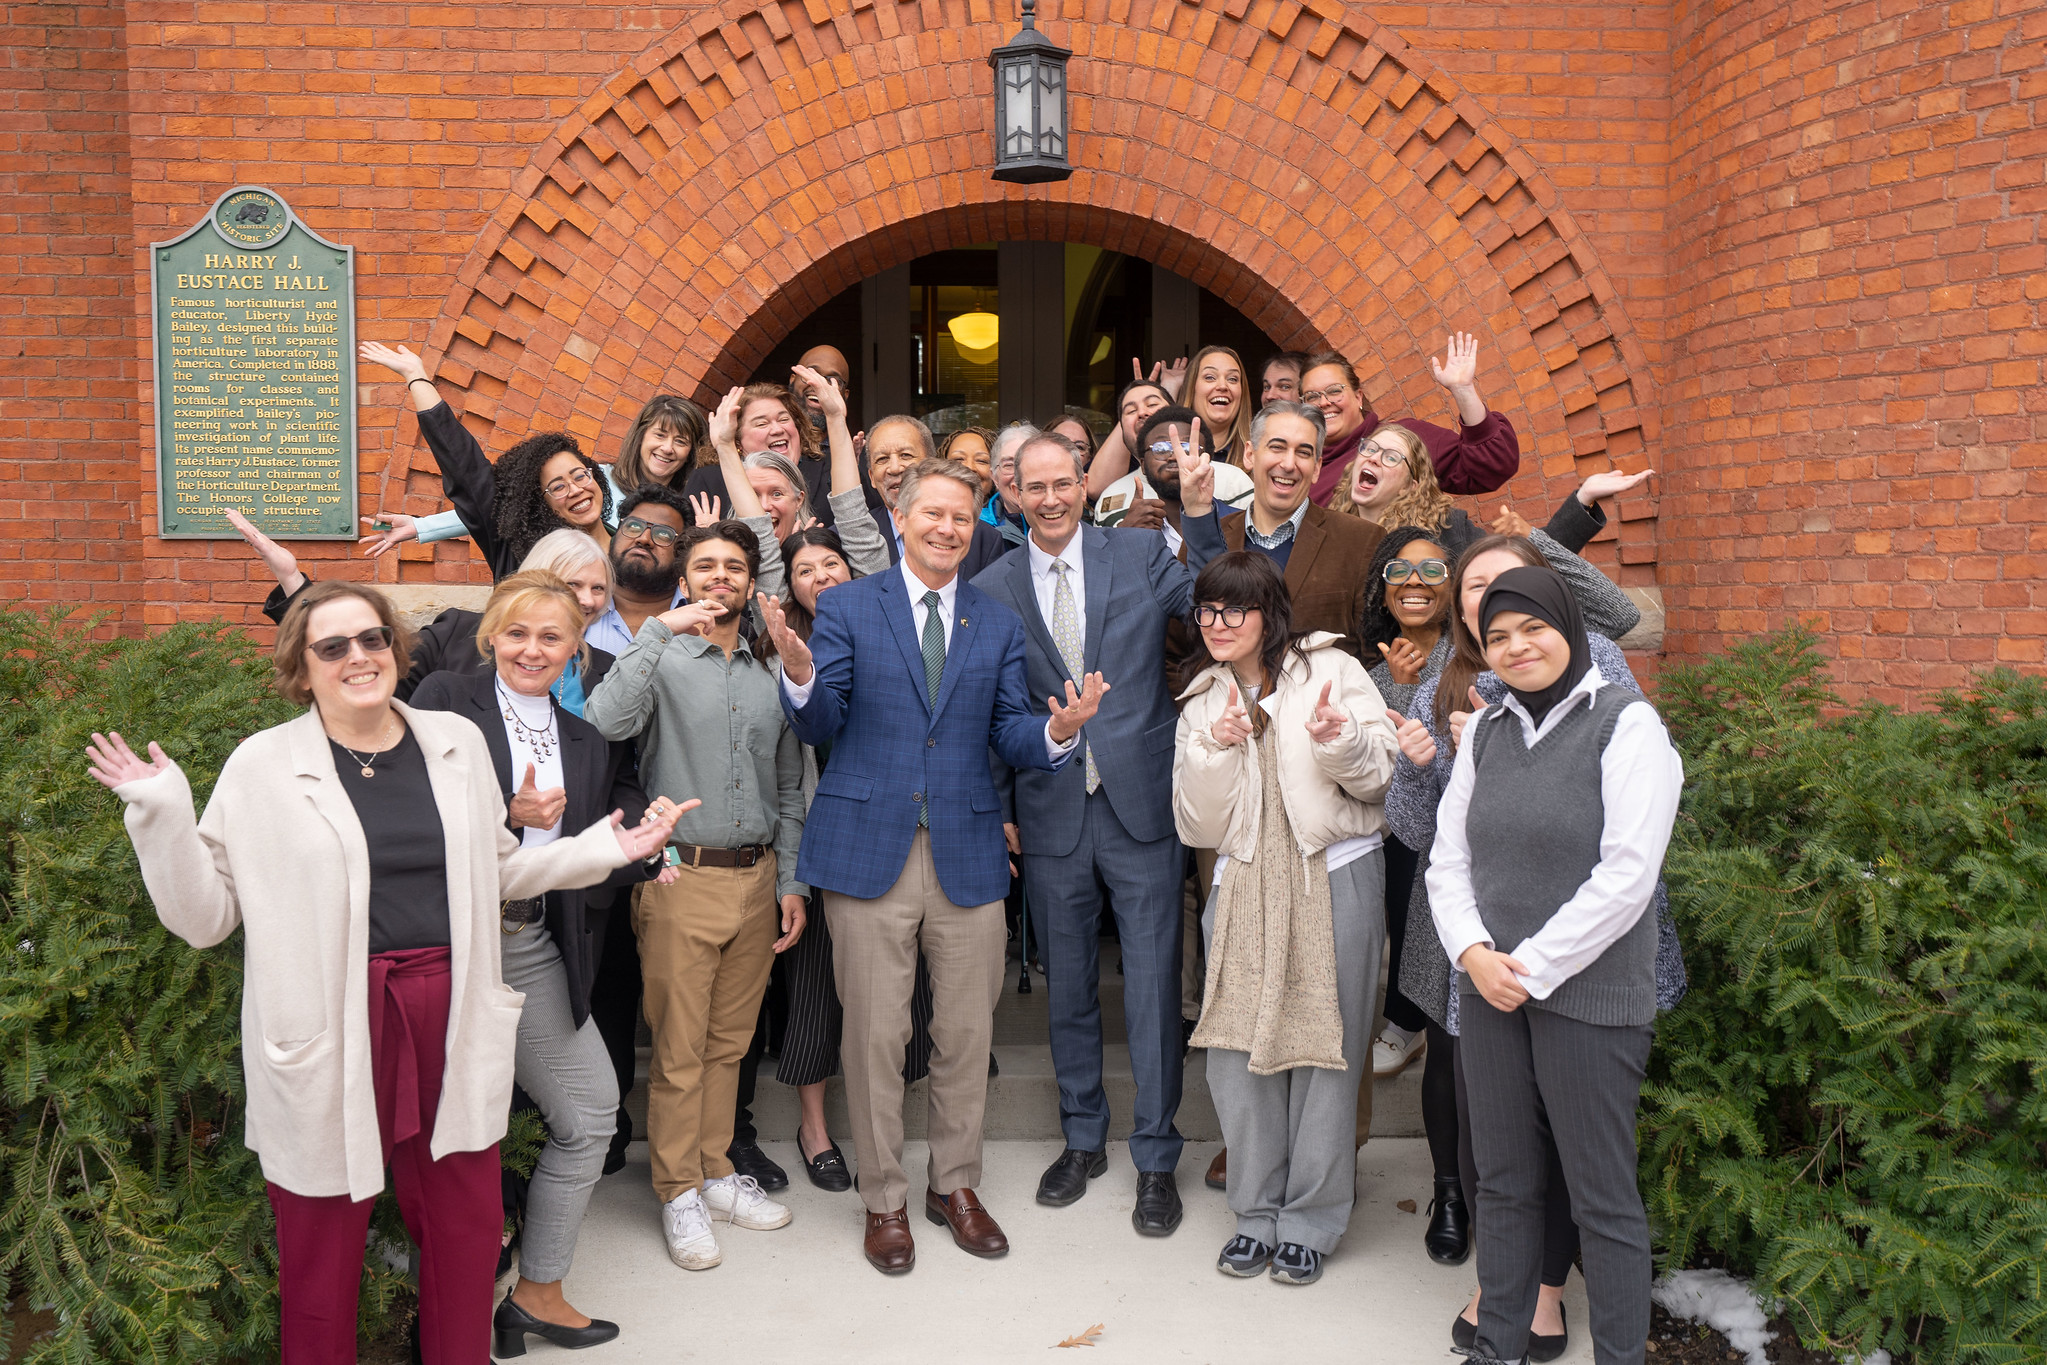 A group of people making silly poses in front of a red brick building